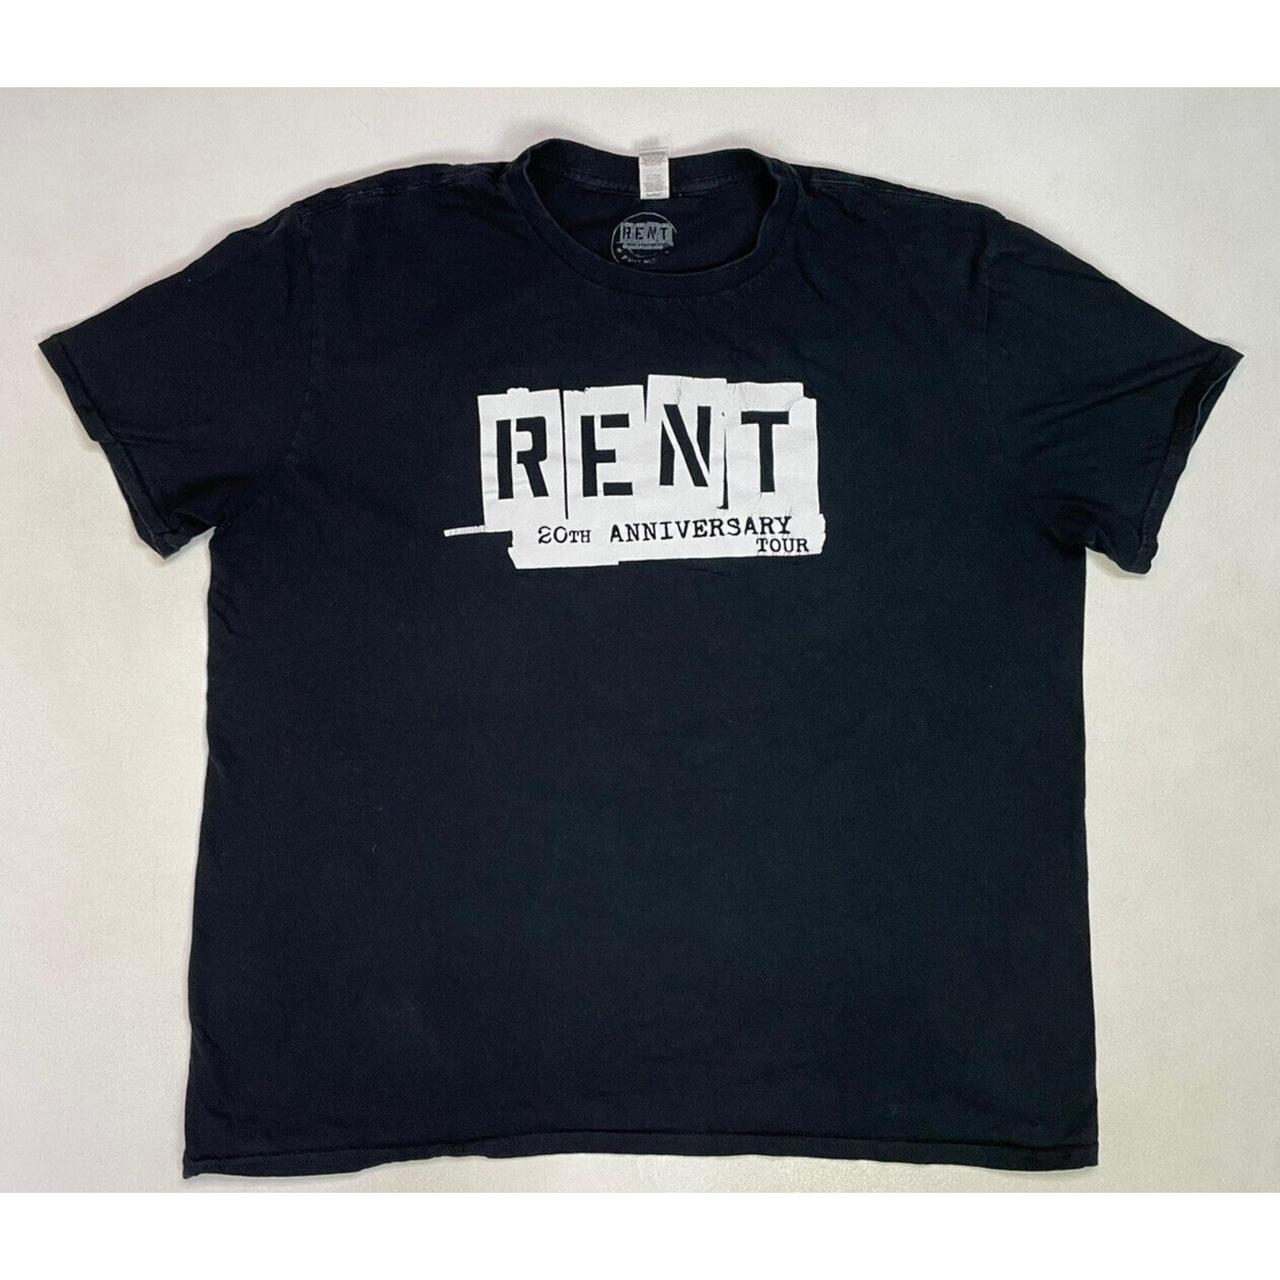 Product Image 1 - RENT 20th Anniversary Tour T-shirt